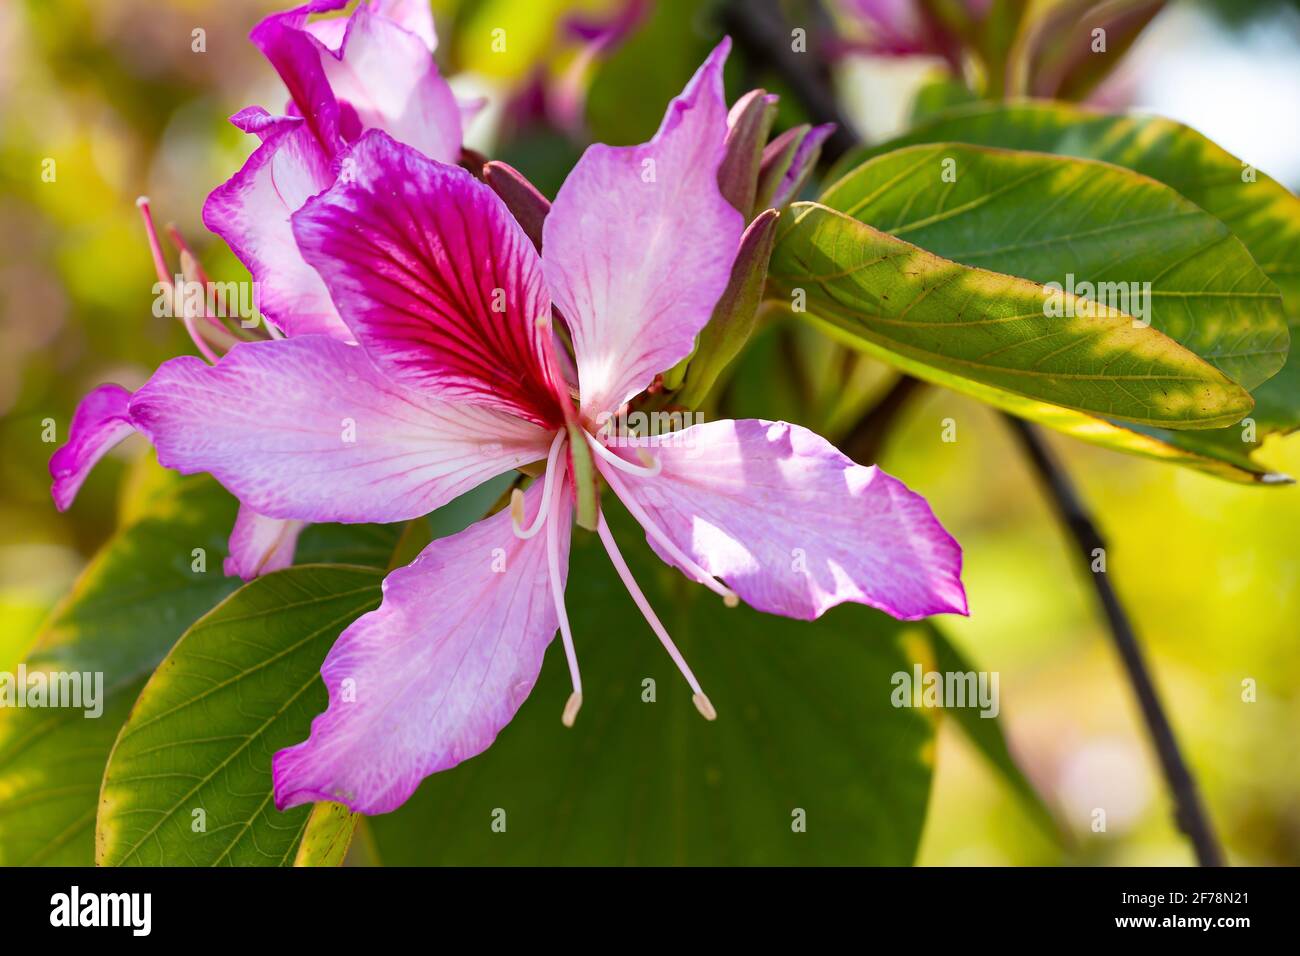 Bauhinia variegata is a species of flowering plant in the legume family, Fabaceae. It is native from China, Southeast Asia, Indian subcontinent. Commo Stock Photo